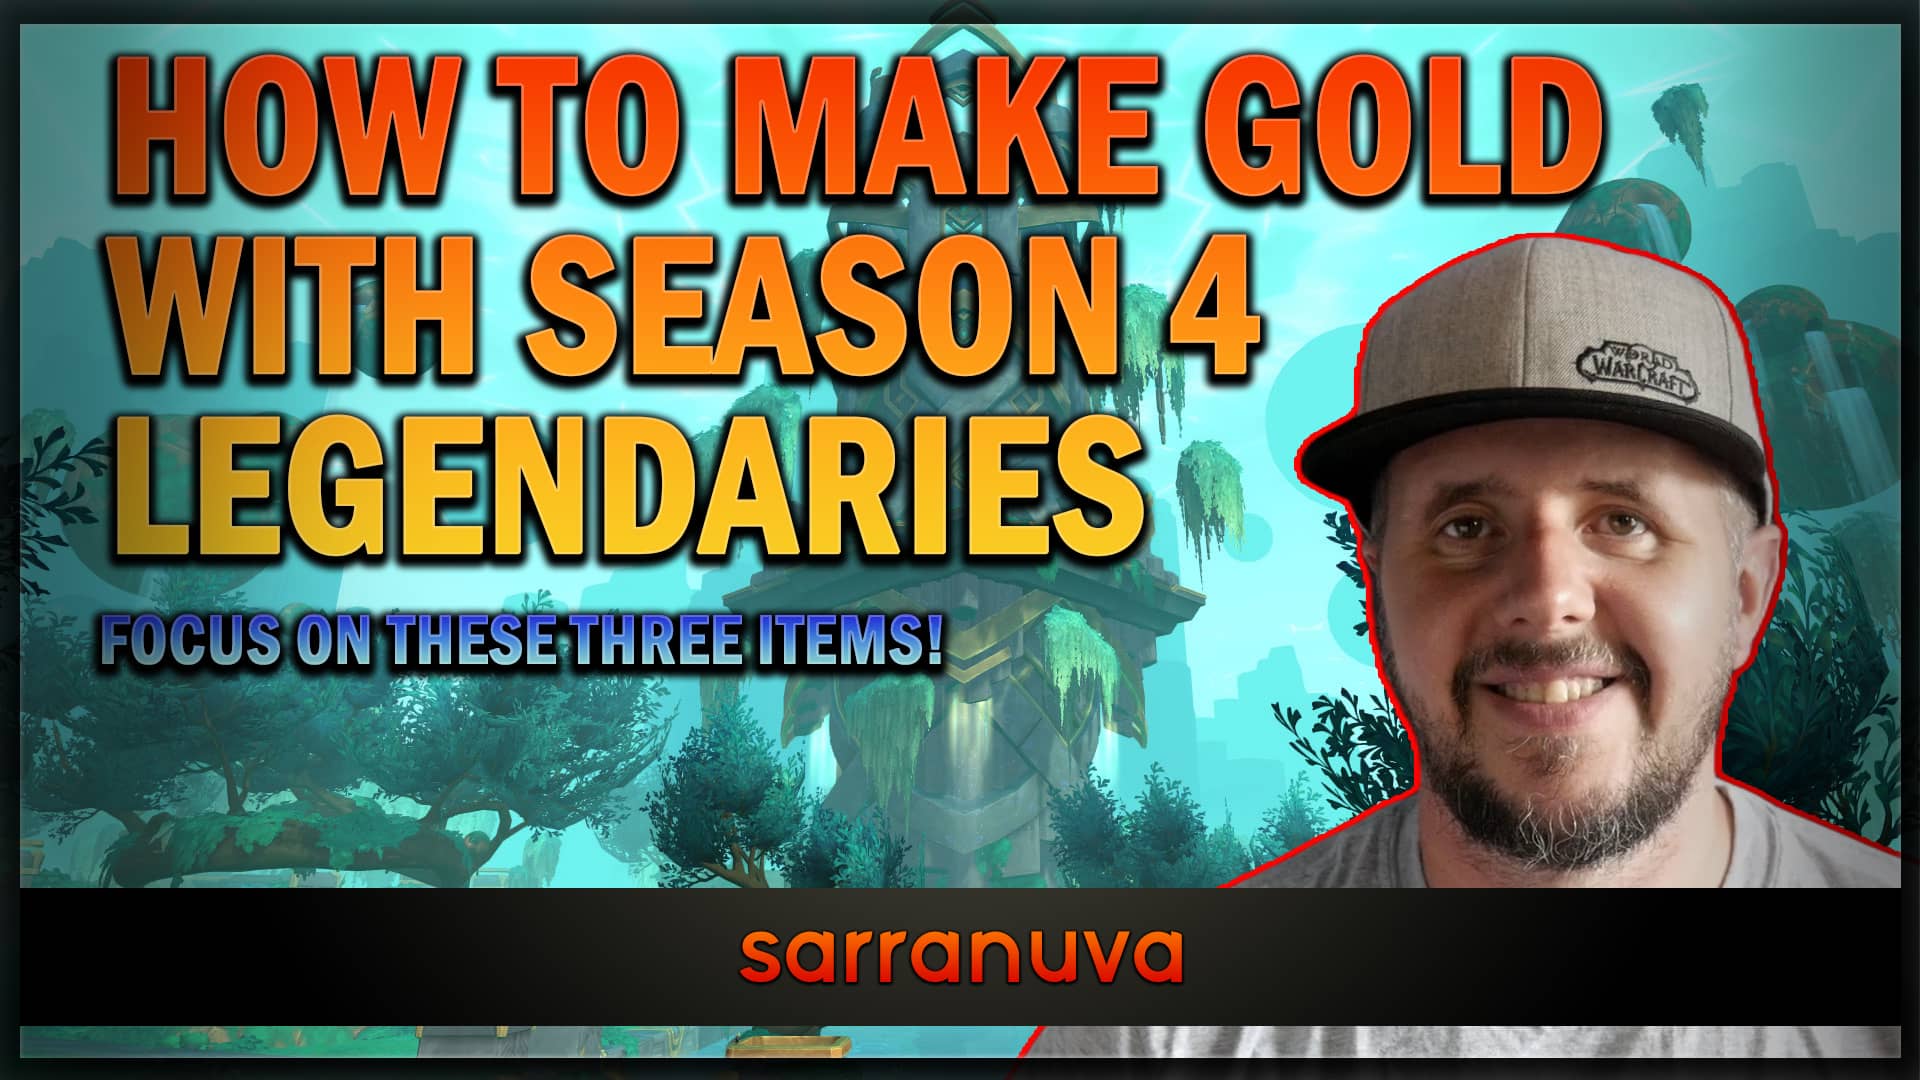 How to make gold with Season 4 Legendaries